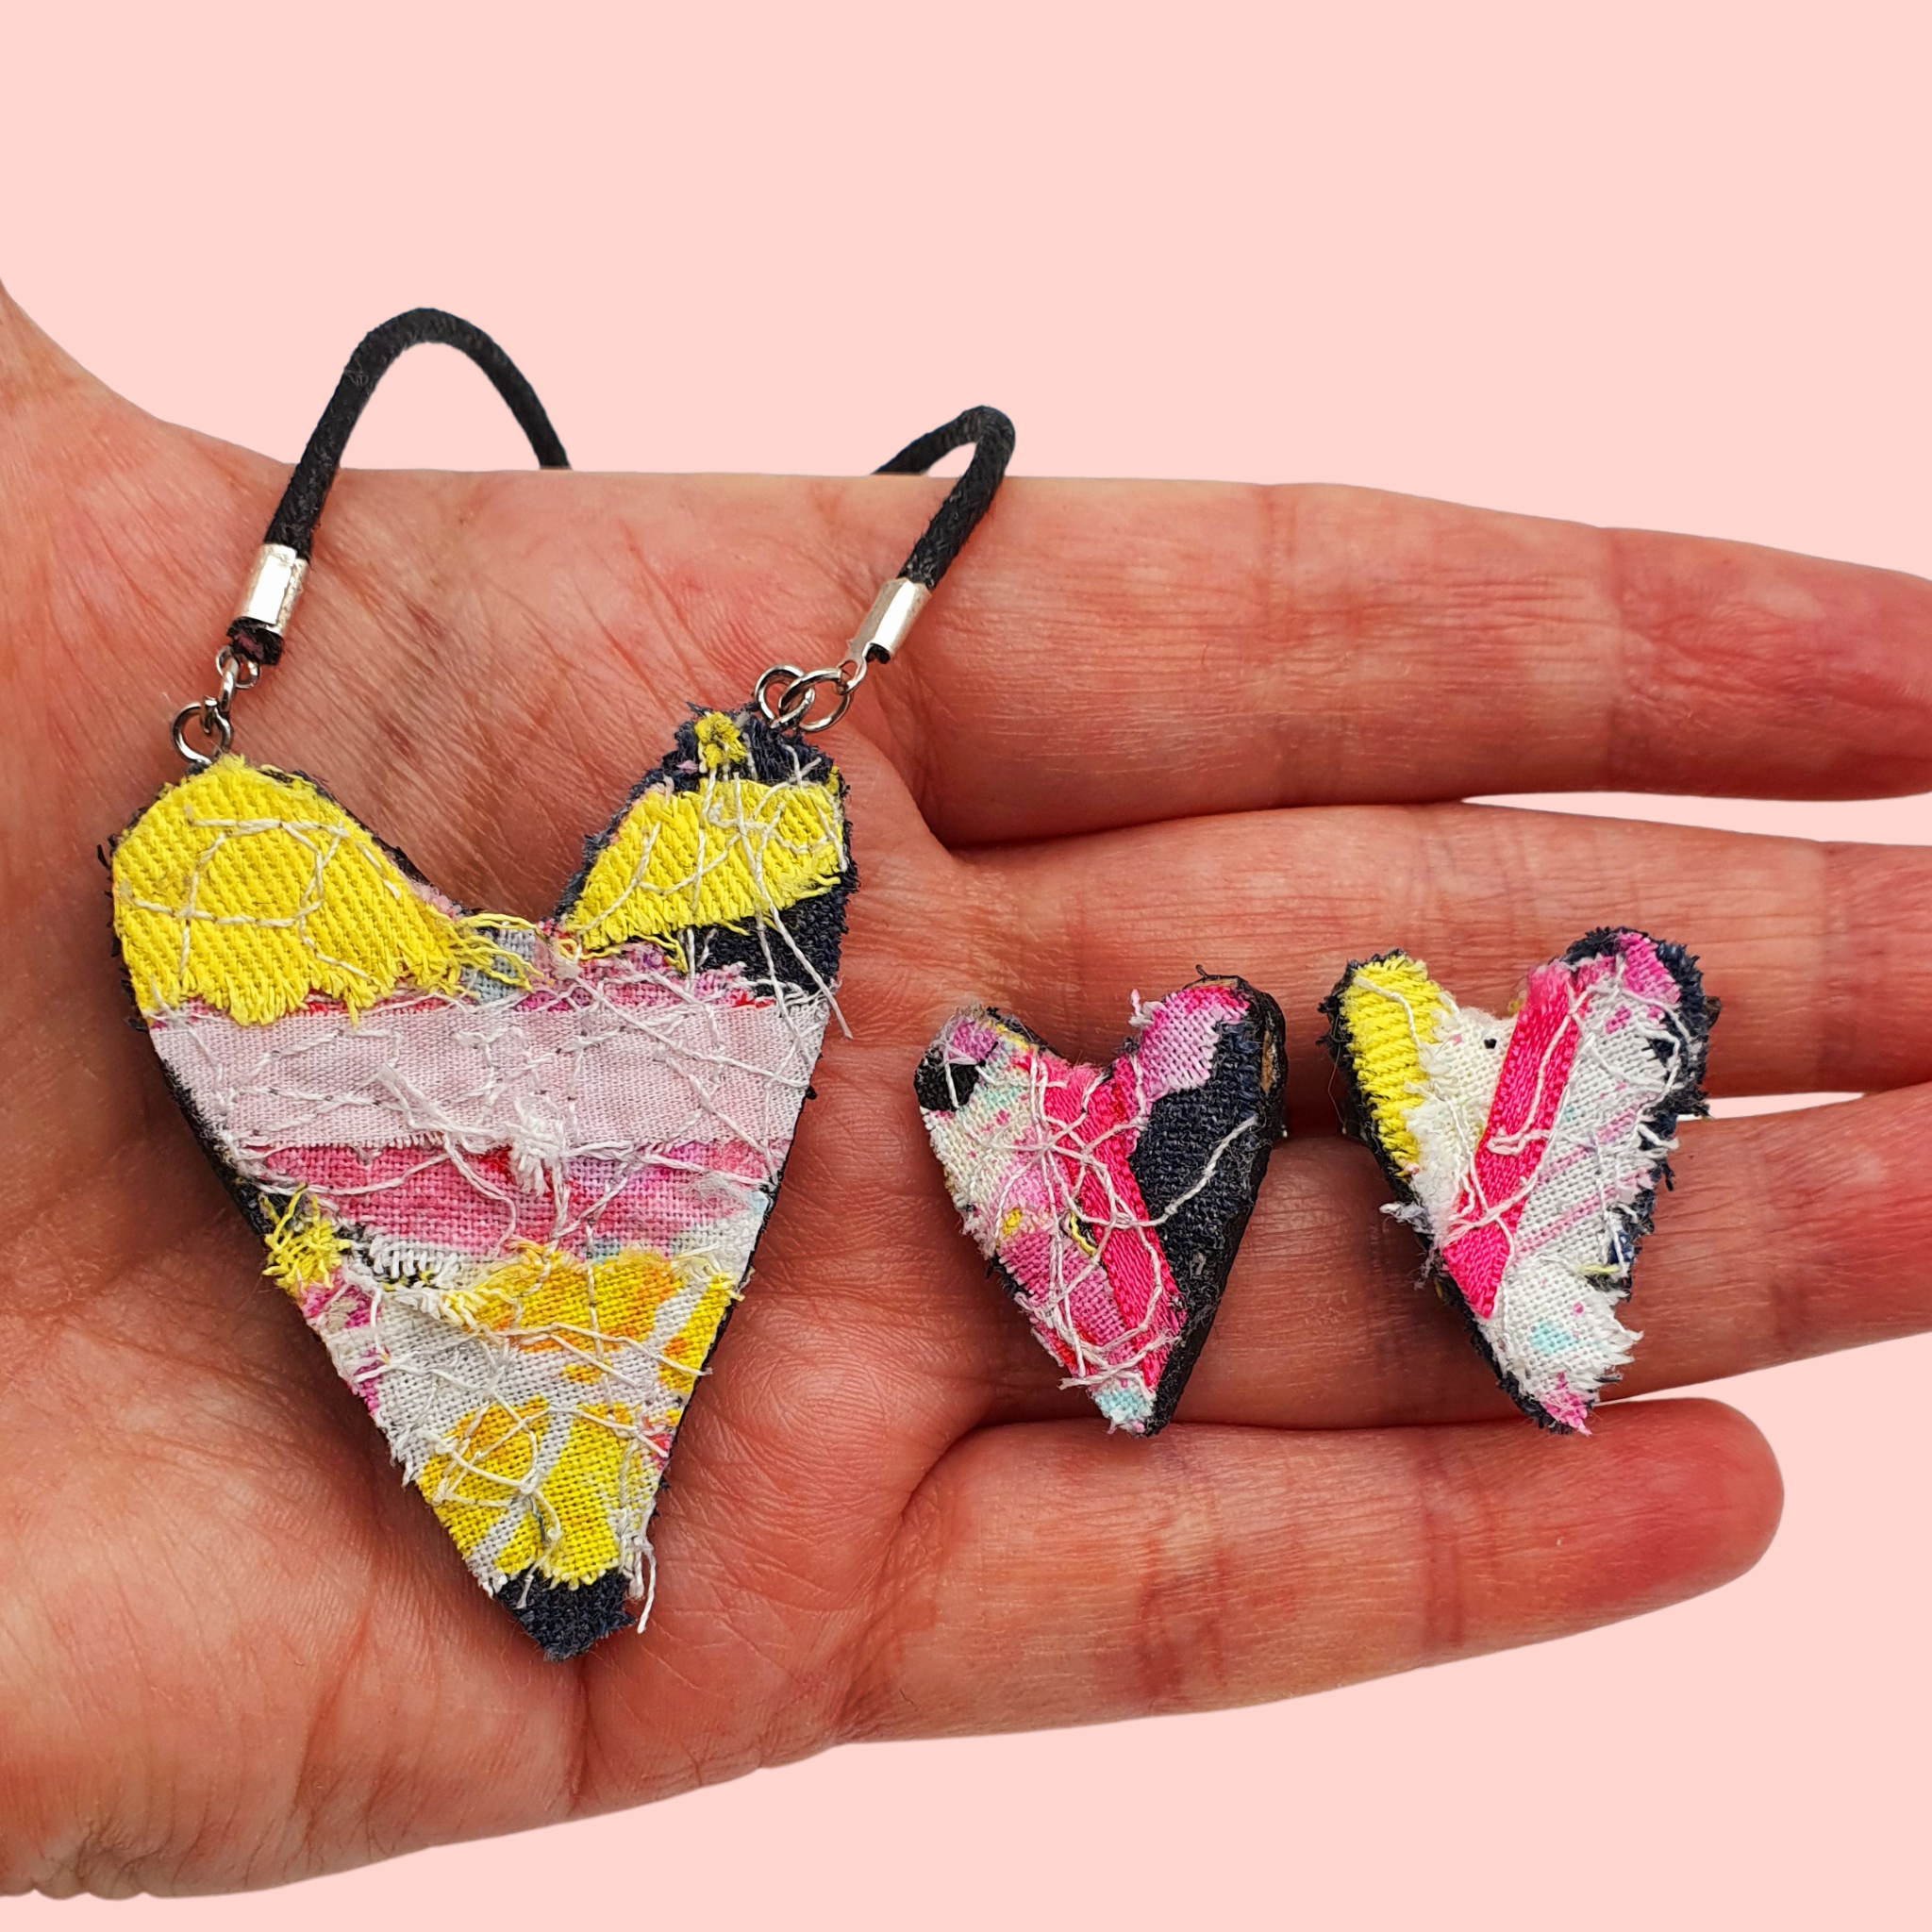 Pink, yellow and denim hearts scrappy necklace and stud earring set.